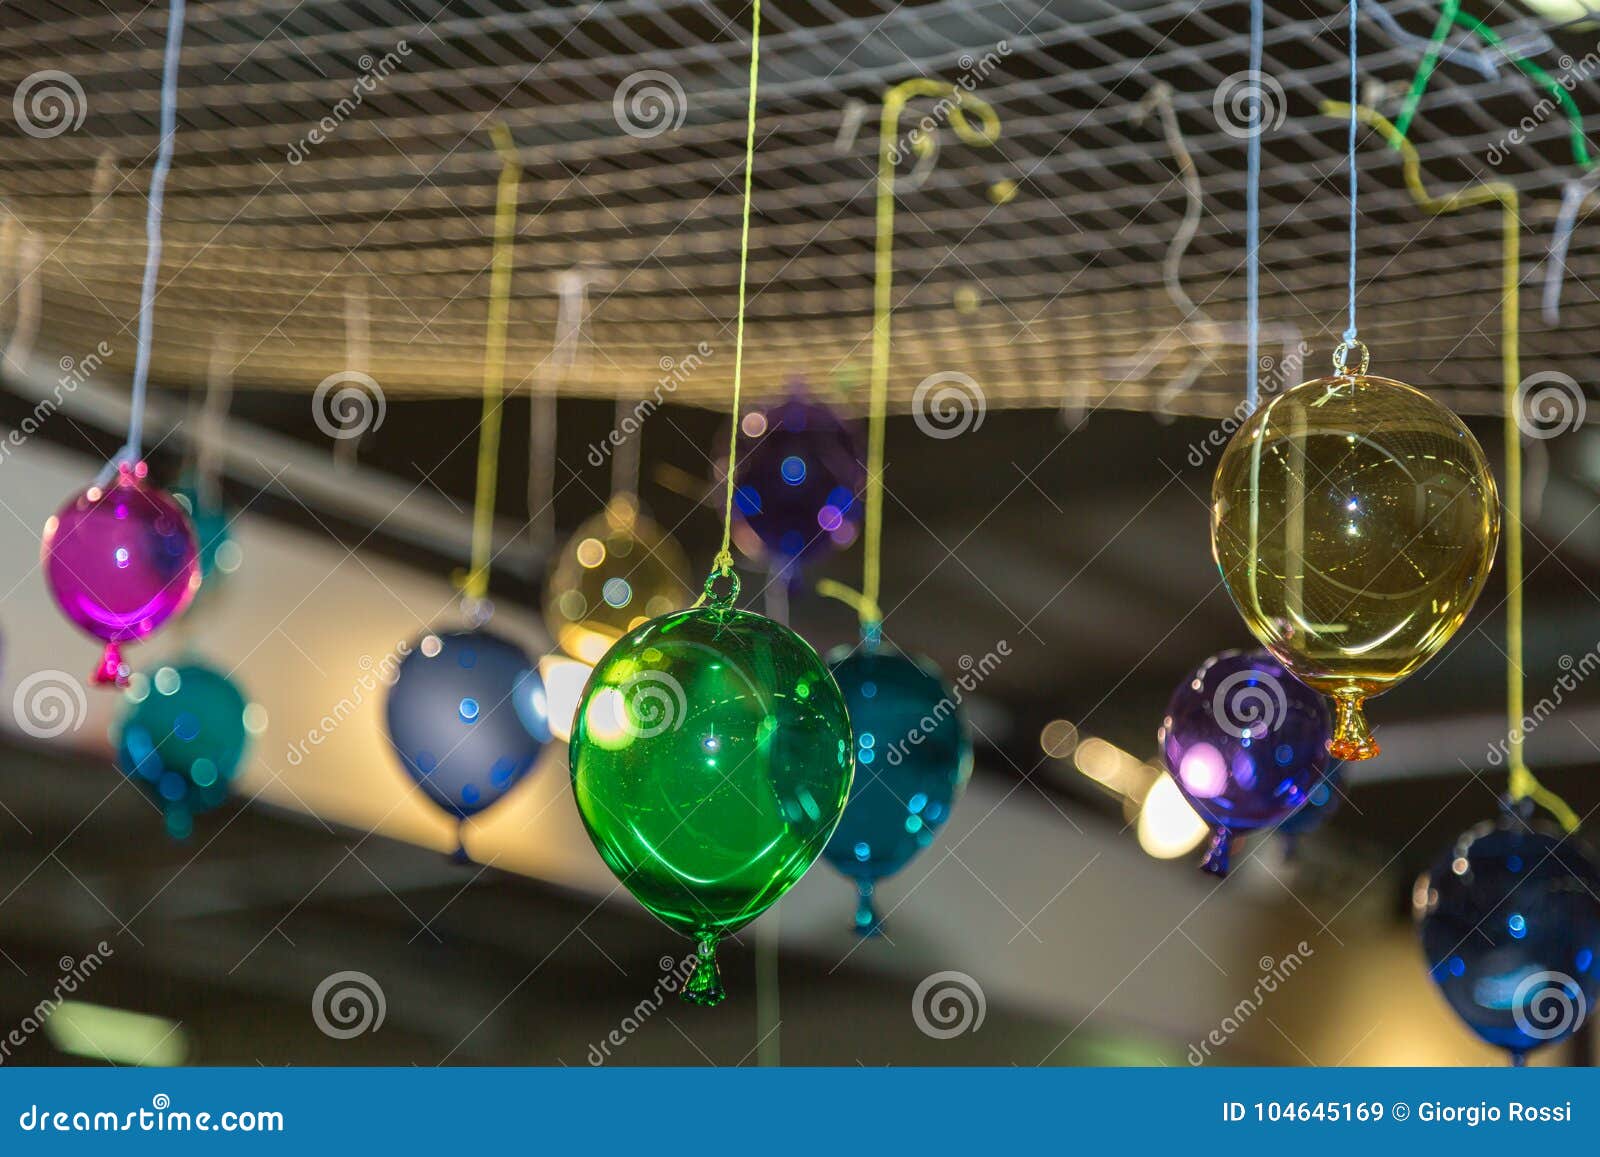 Multicolored Glass Balloons Hanging From The Ceiling Stock Image